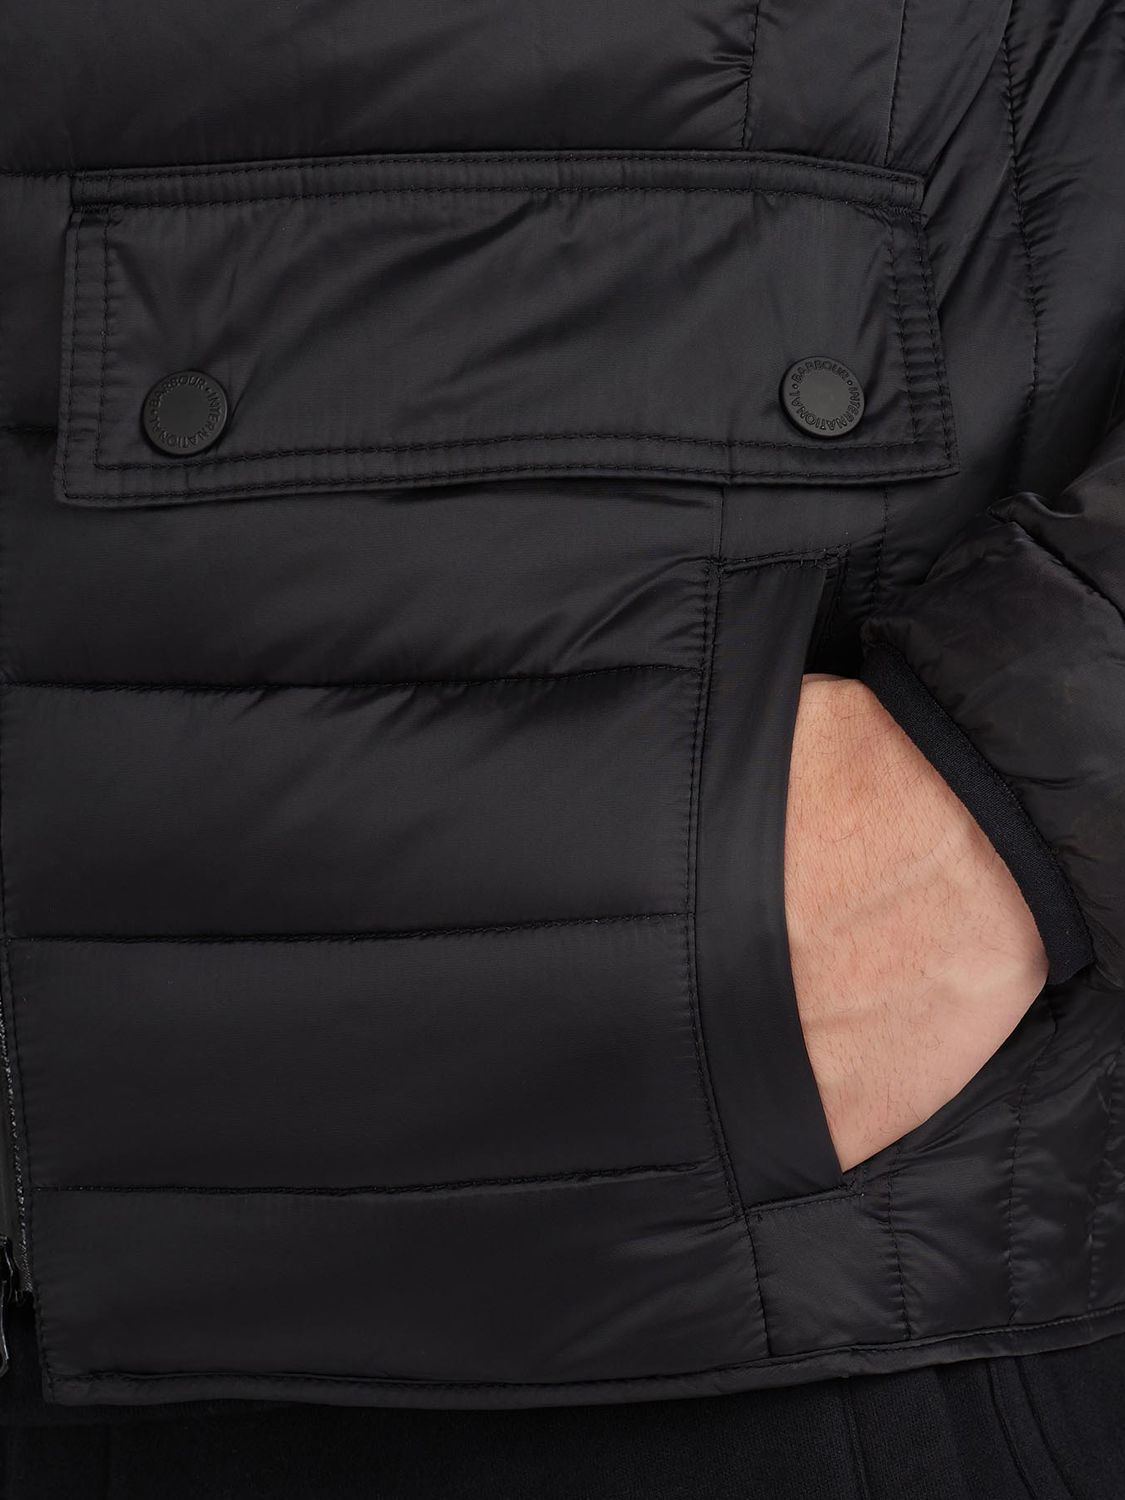 Barbour International Ouston Hooded Quilted Jacket at John Lewis & Partners